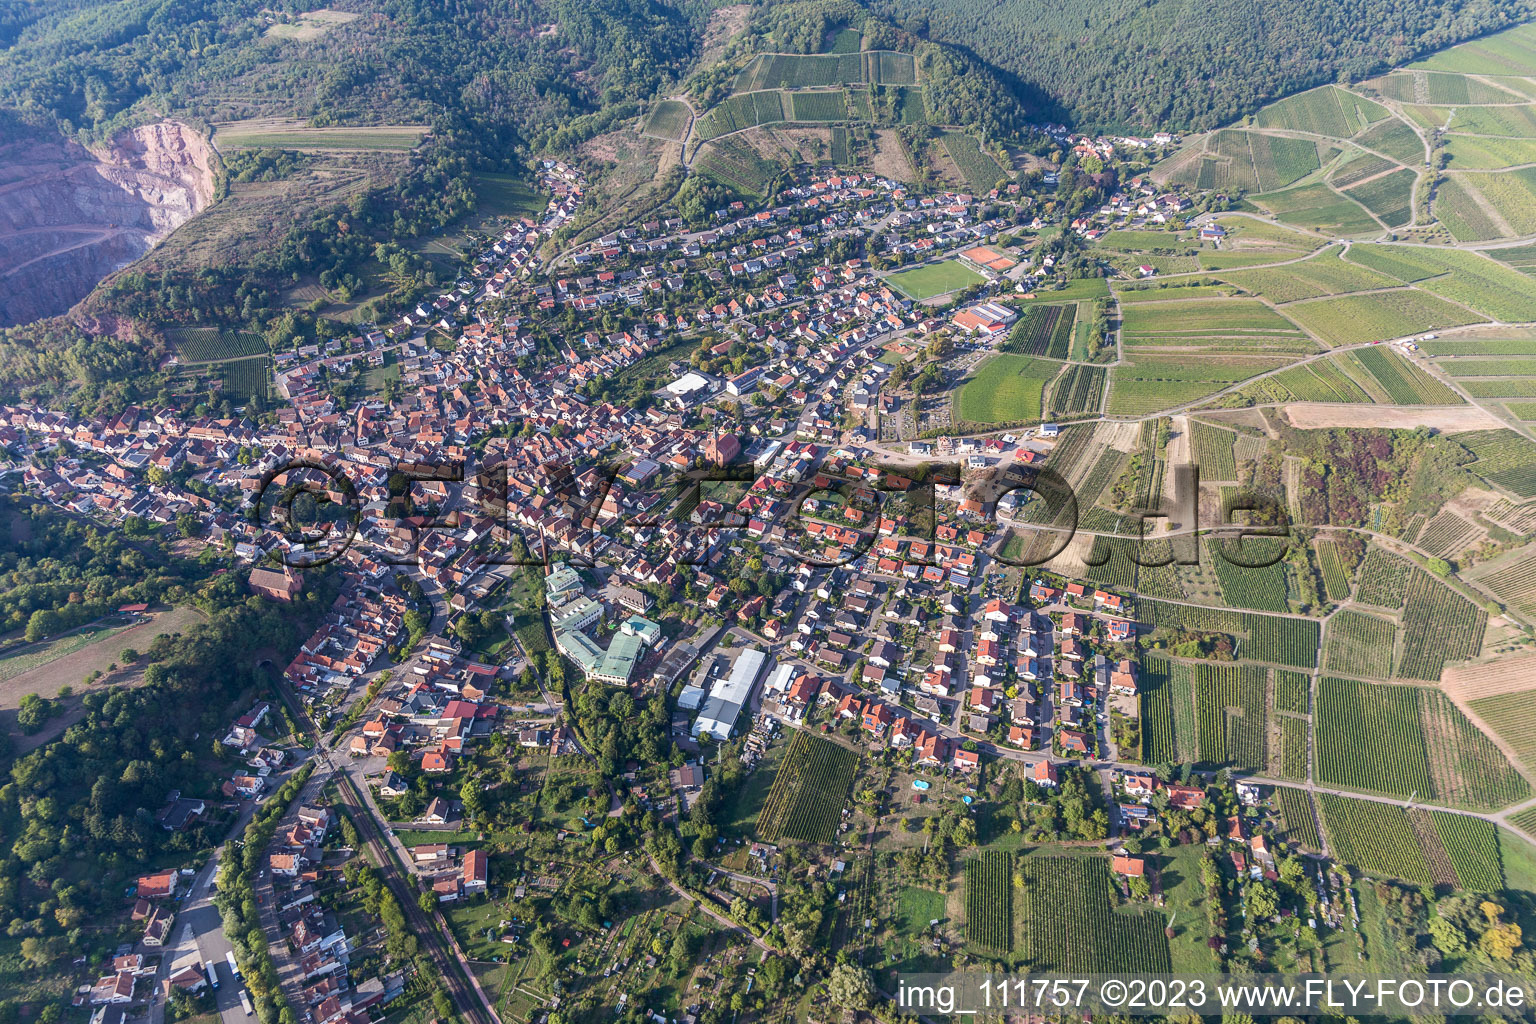 Albersweiler in the state Rhineland-Palatinate, Germany seen from above